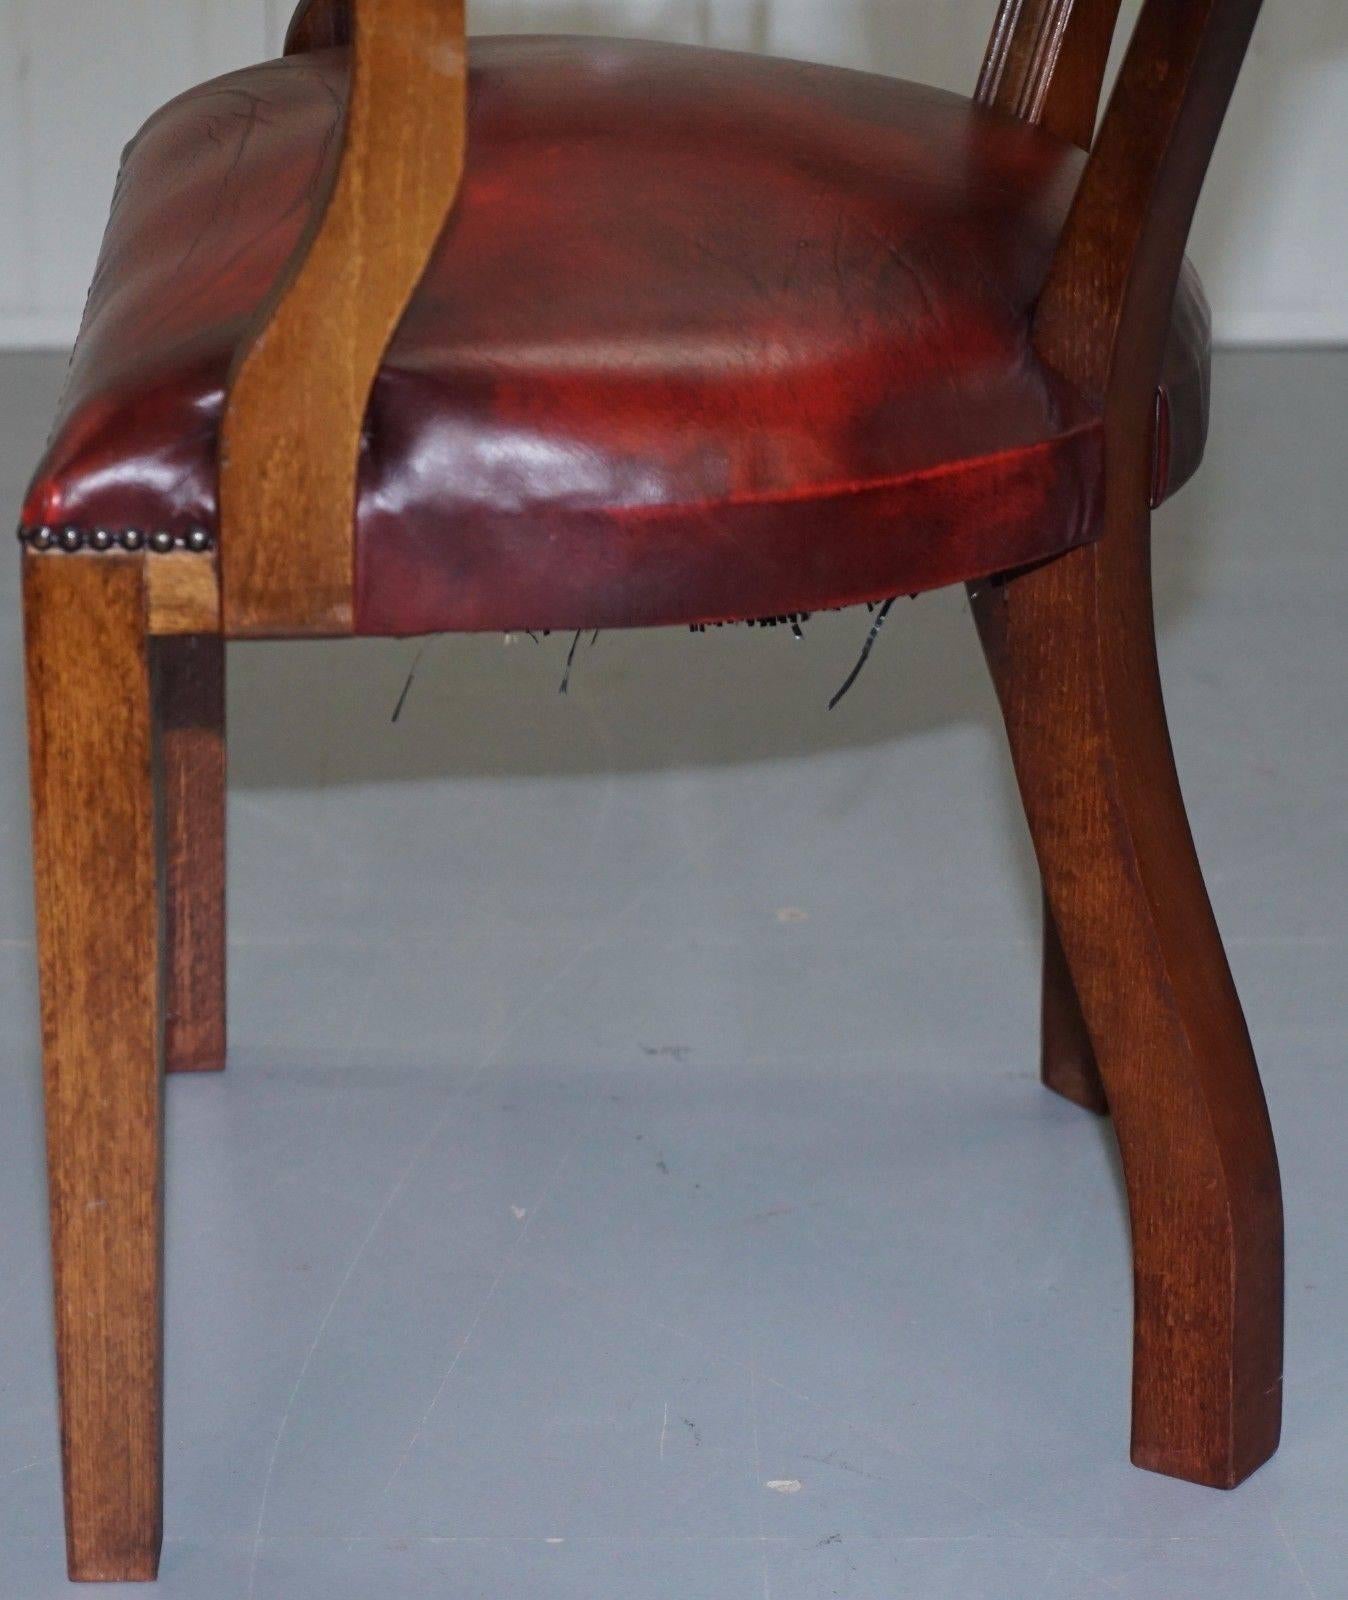 Lovely Oxblood Leather Chesterfield Court Chair for Desks or Guests Lovely Find 4